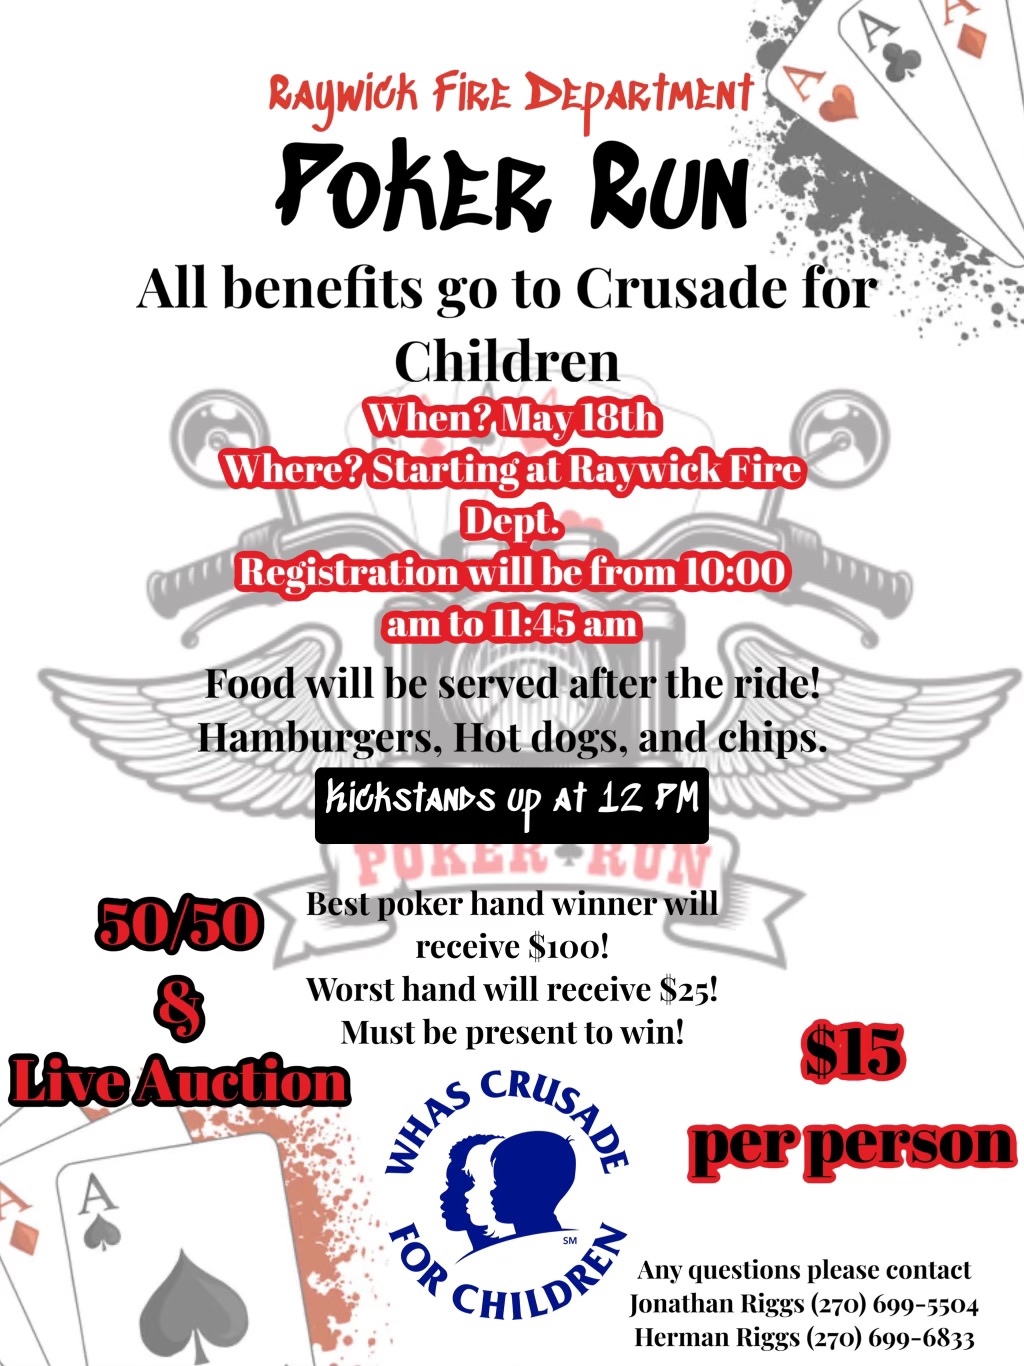 Crusade for Children Poker Run and Auction